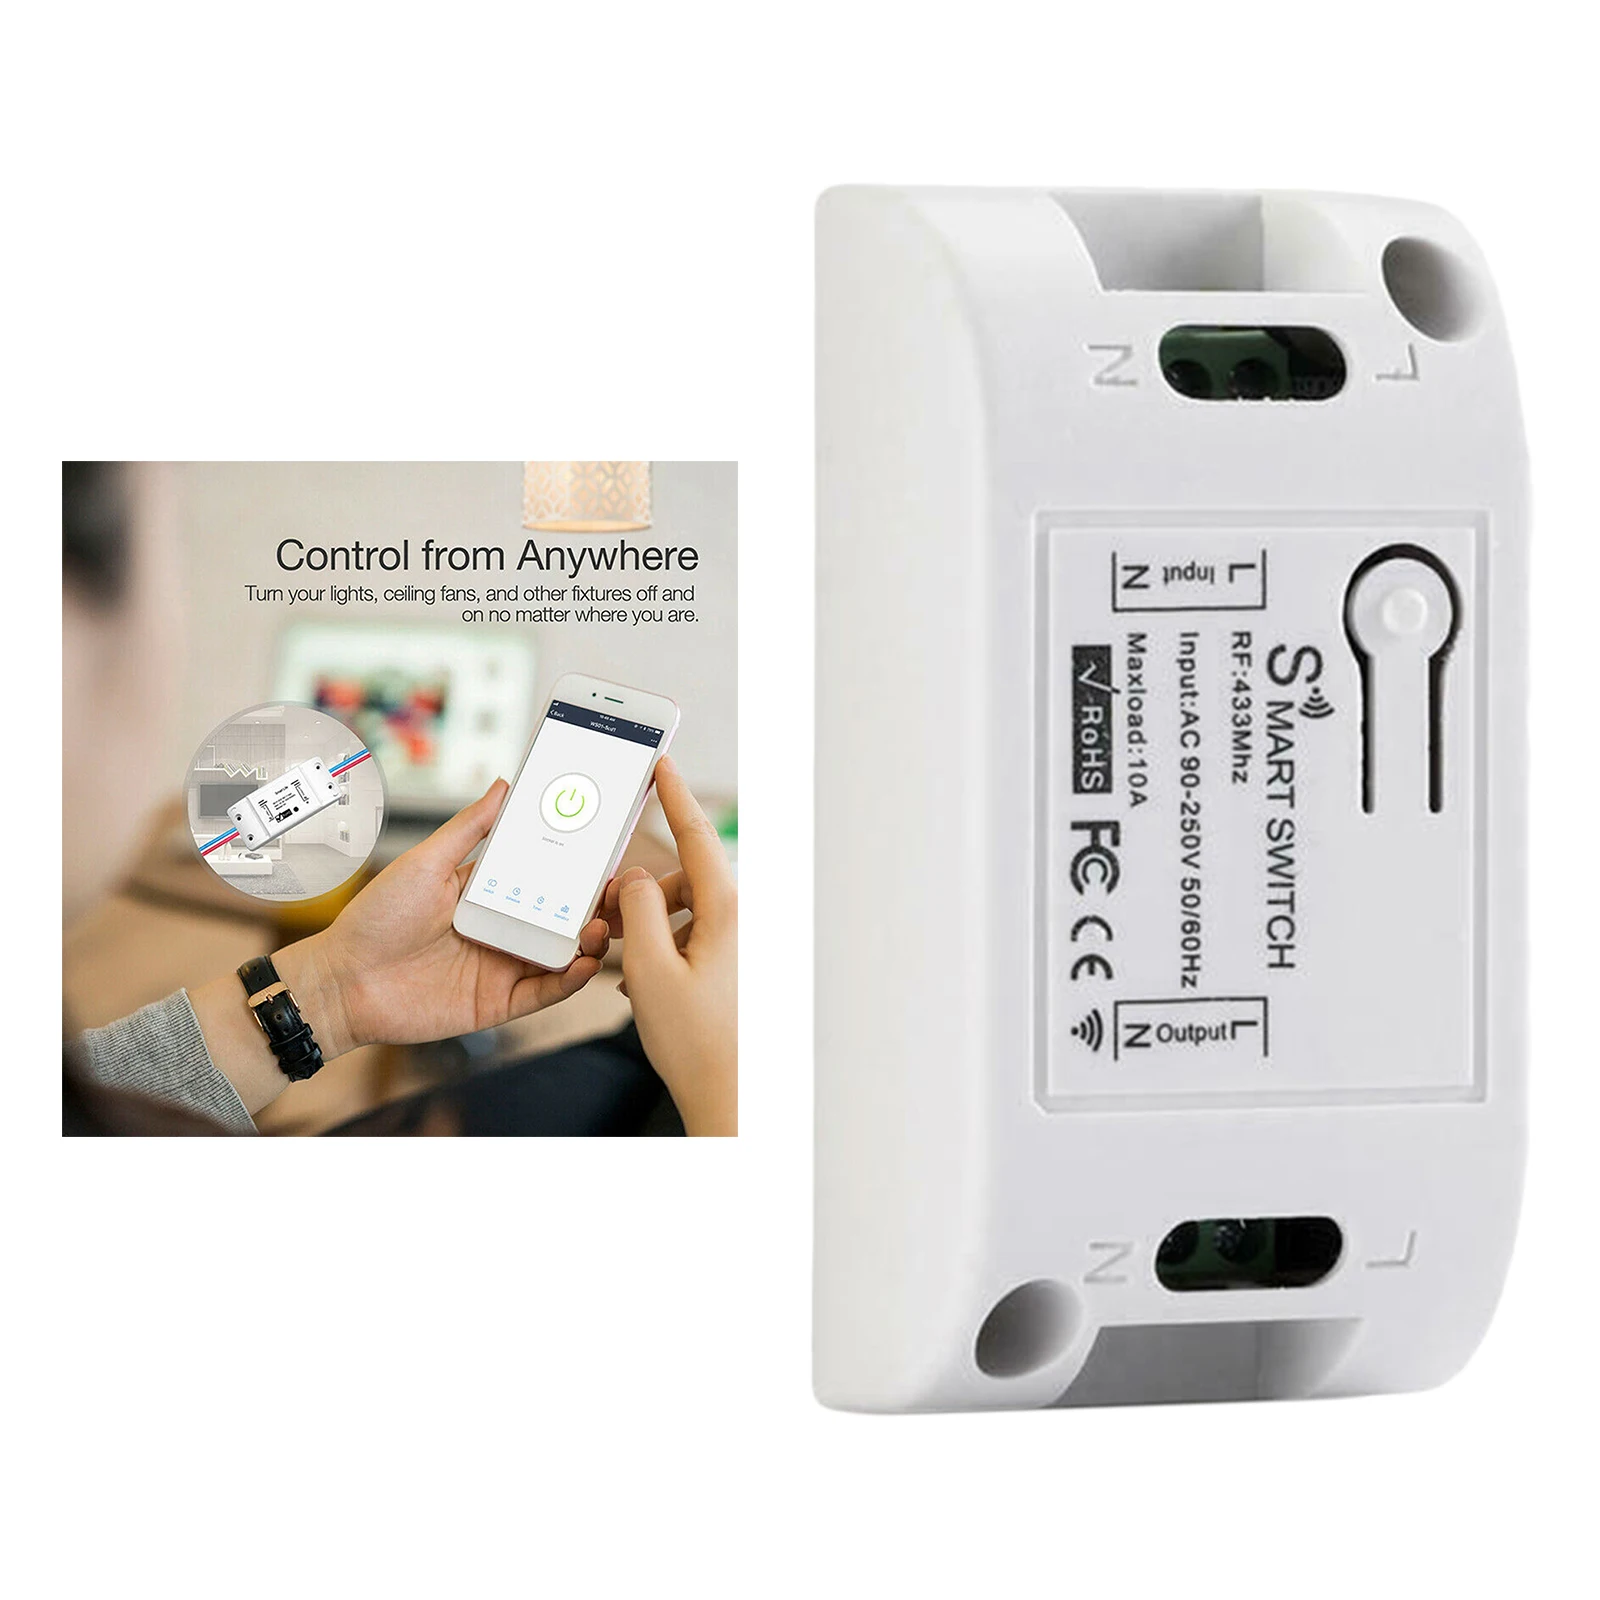 WIFI Wireless Smart Switch Relay Module for Smart Home Be Applied to Access Control, Turn on PC, Garage Door